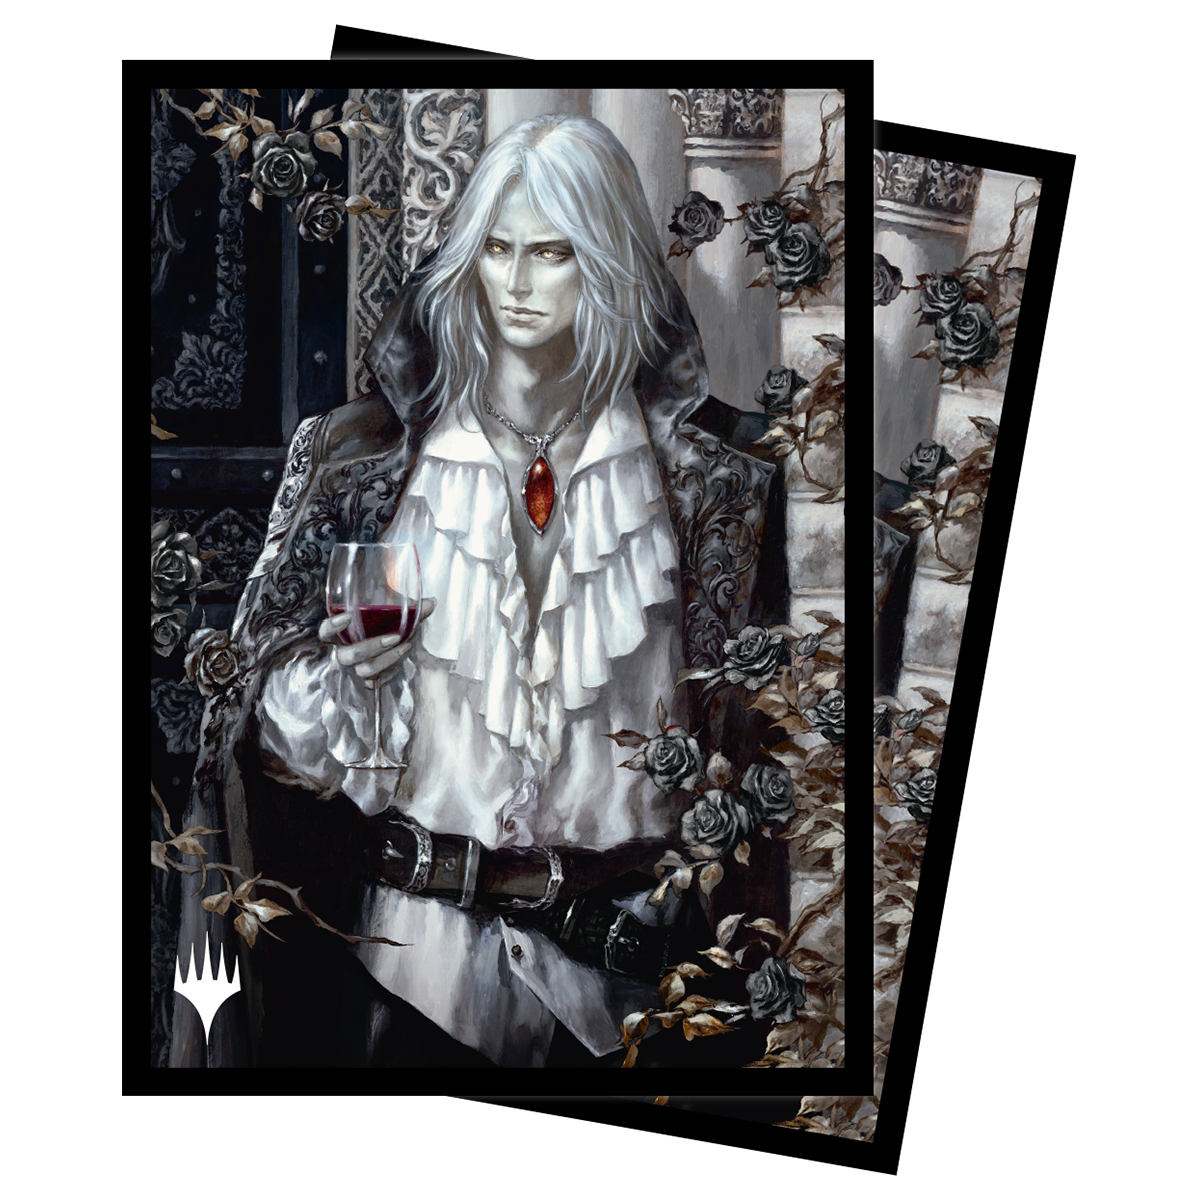 Innistrad: Crimson Vow Sorin the Mirthless Standard Deck Protector Sleeves (100ct) for Magic: The Gathering | Ultra PRO International